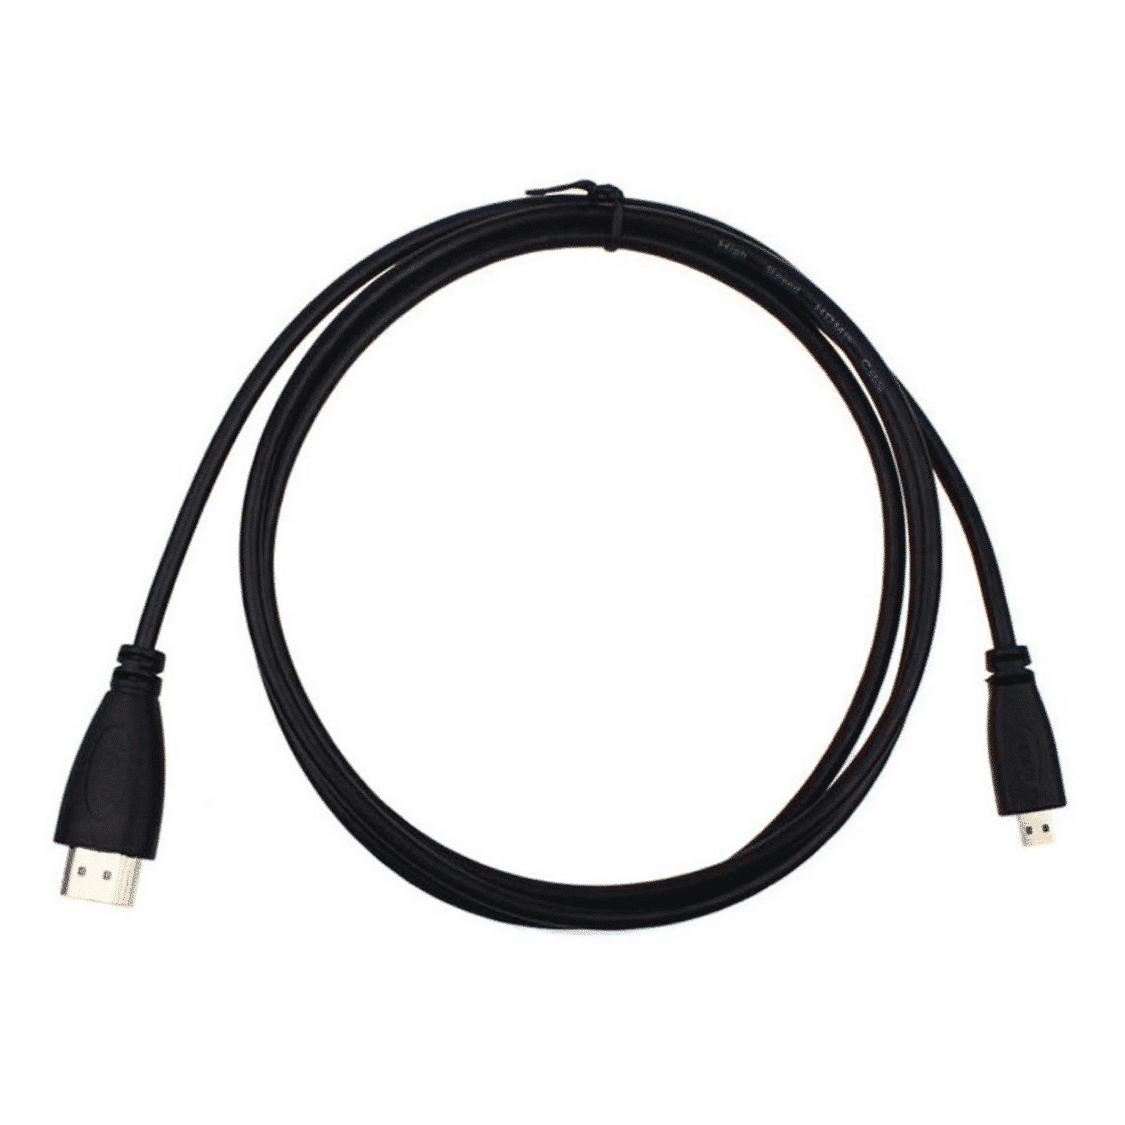 HDMI Cable for Onyx Boox Max Lumi and Max 3